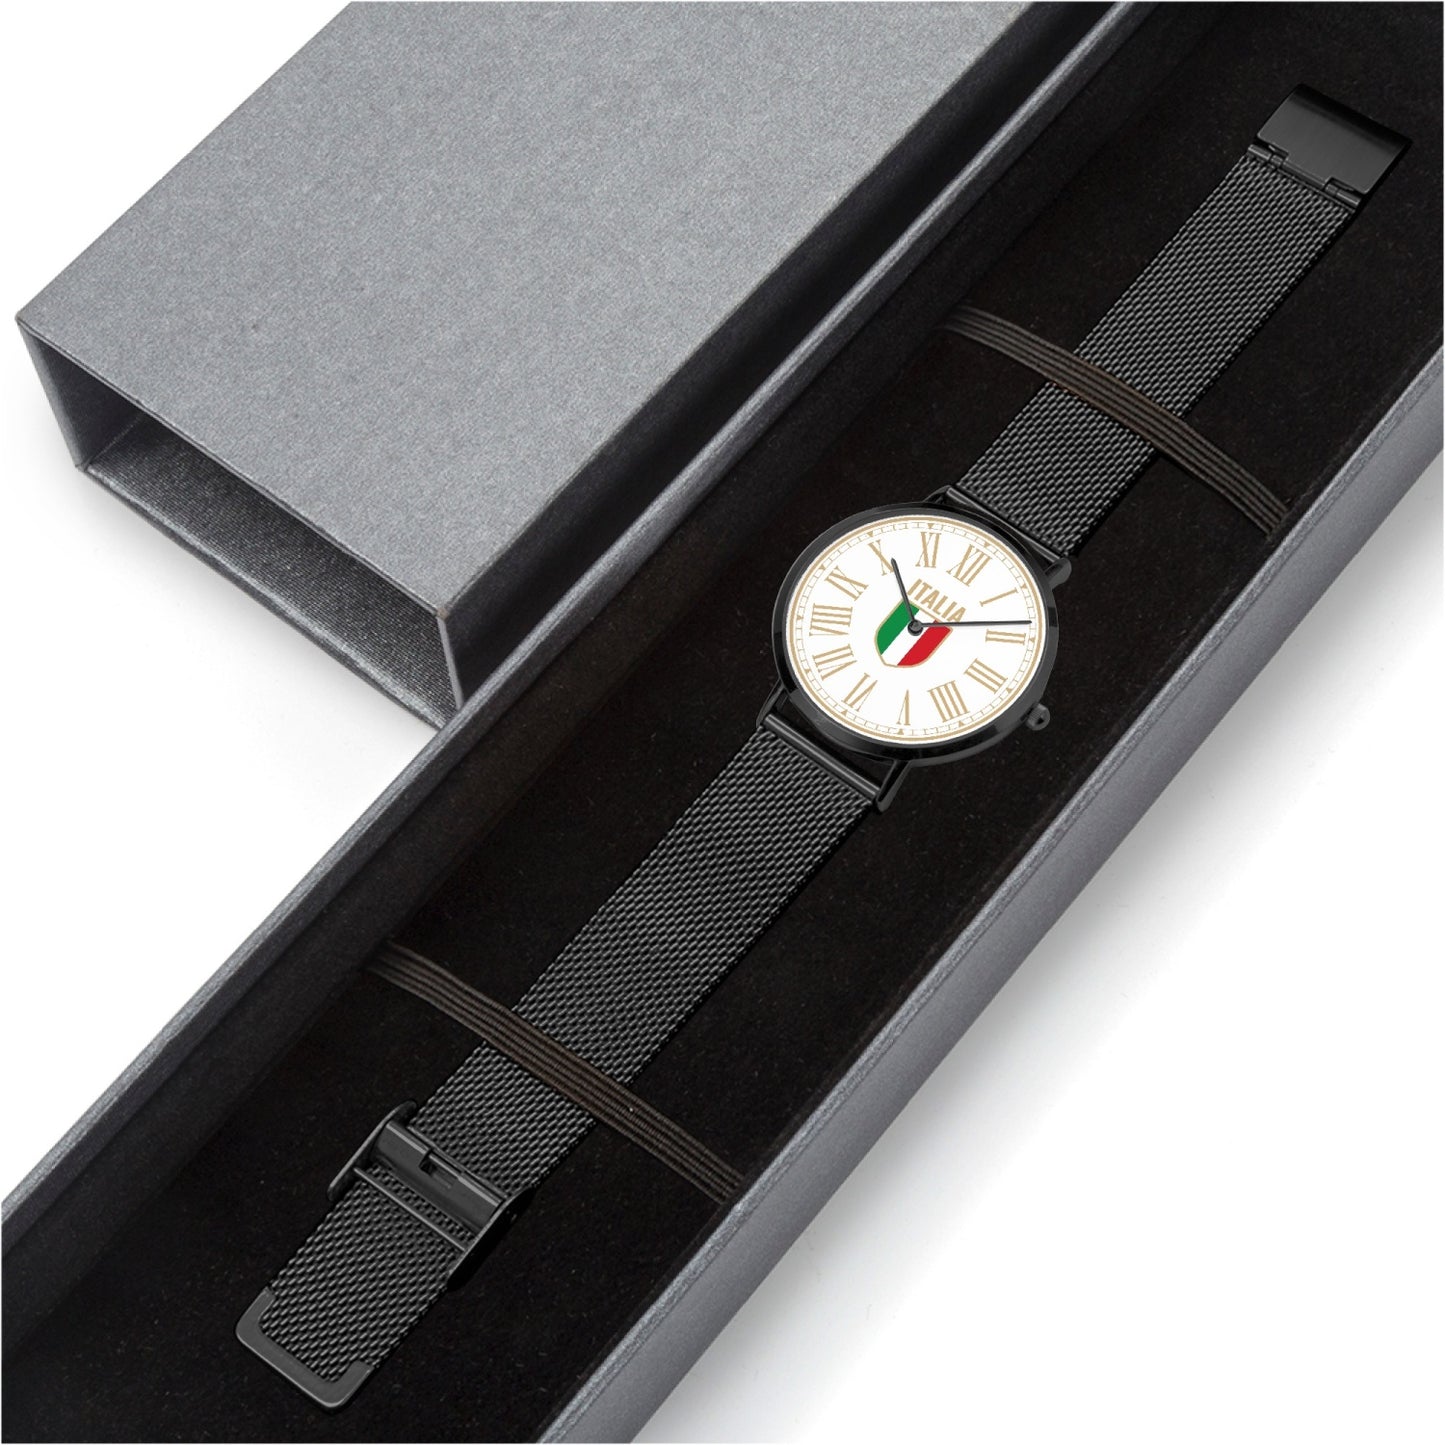 Ultra-thin Stainless Steel Quartz Watch - Italy gold white